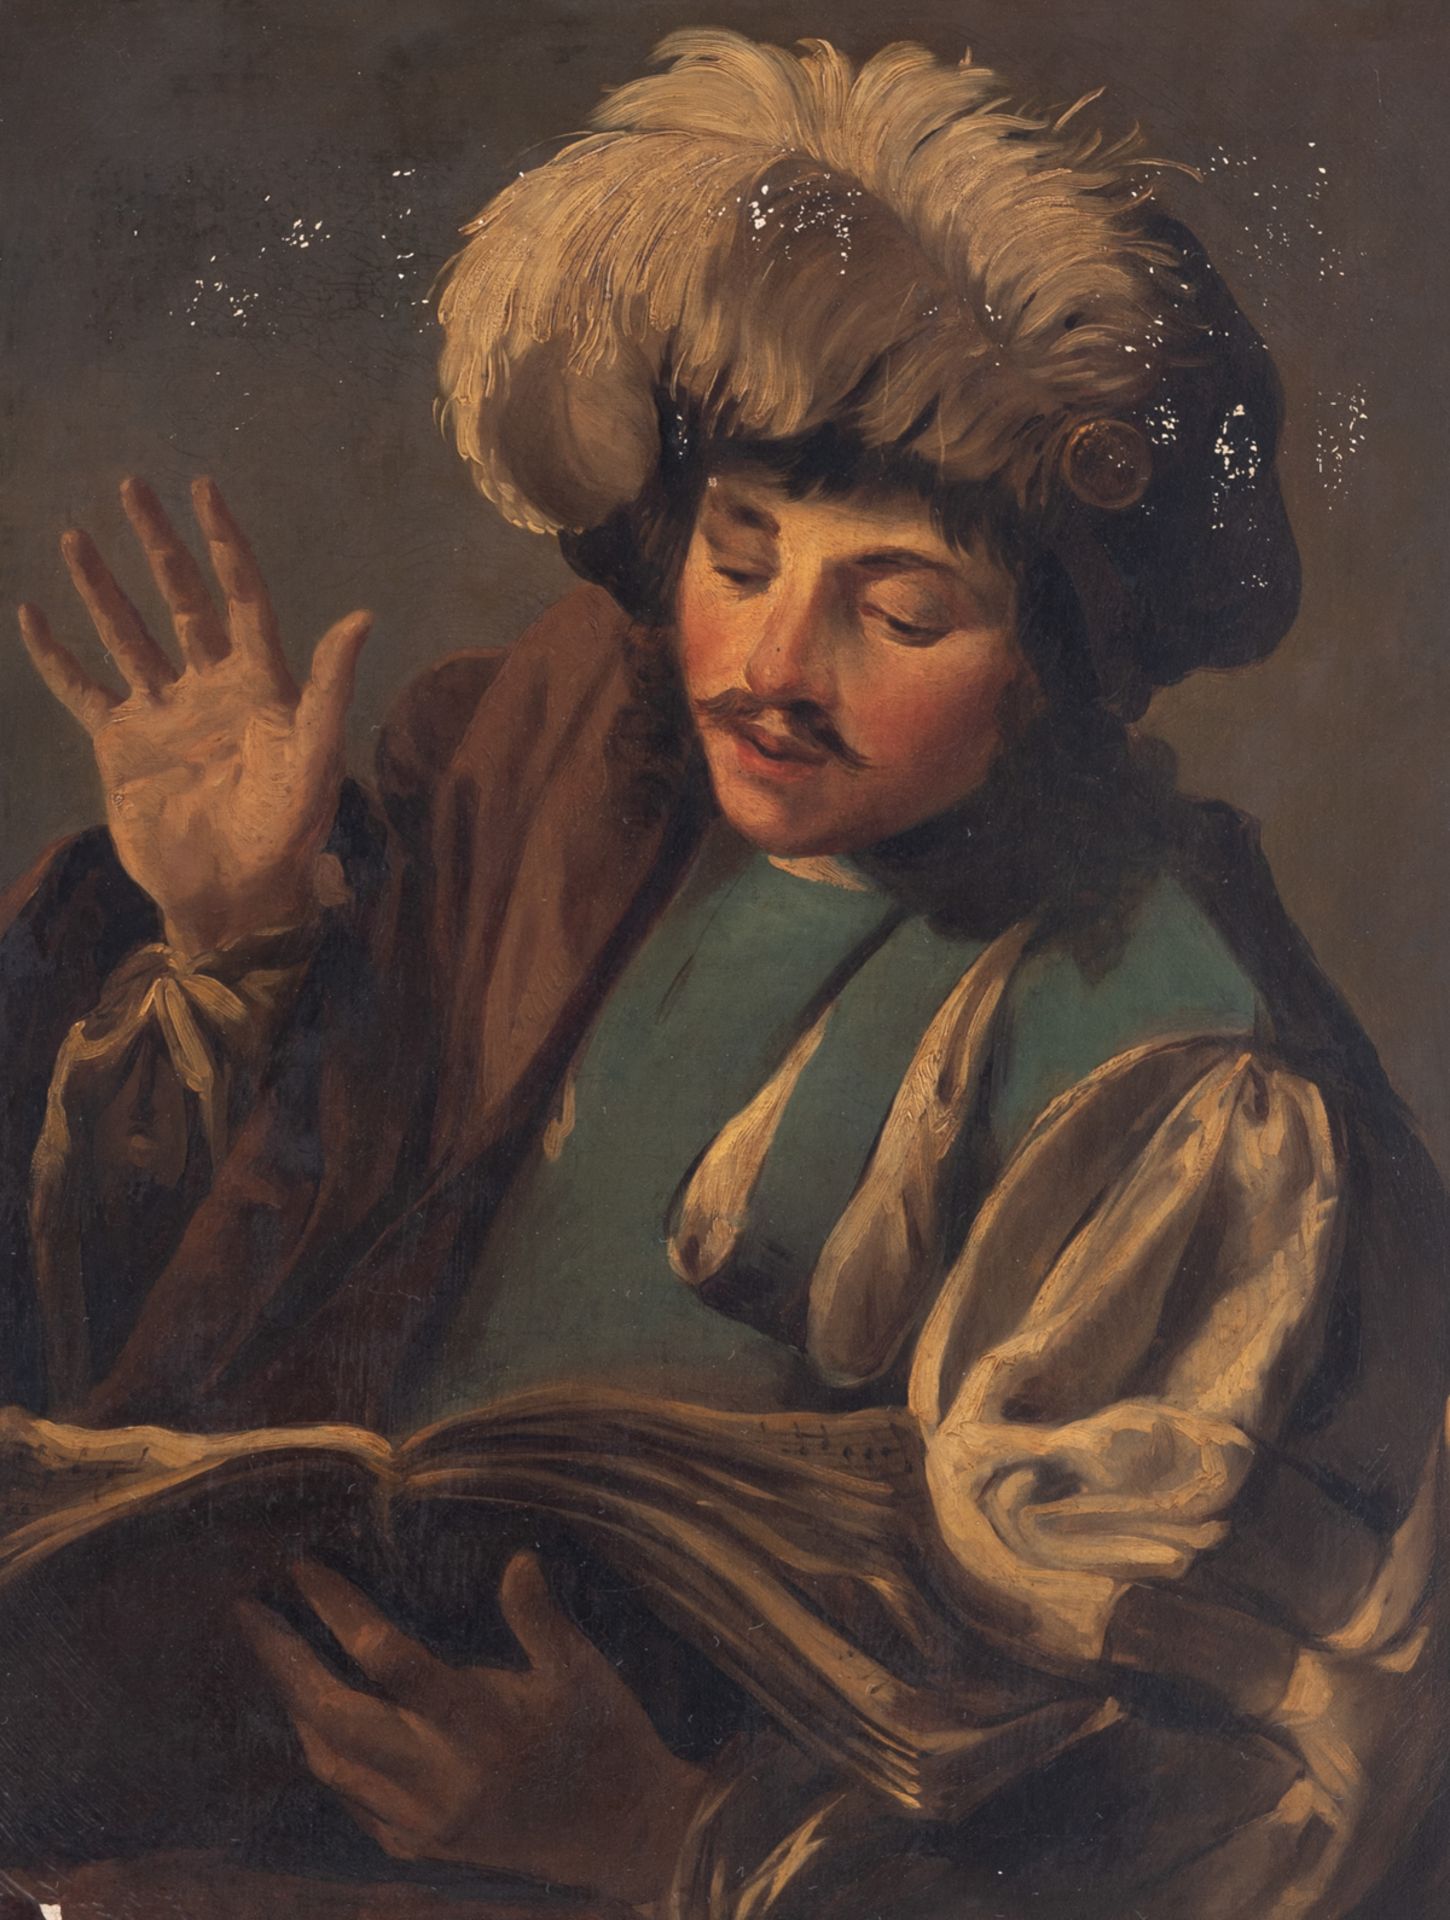 No visible signature, a singing boy, after the Dutch Golden Age painter Hendrick ter Brugghen, 19thC